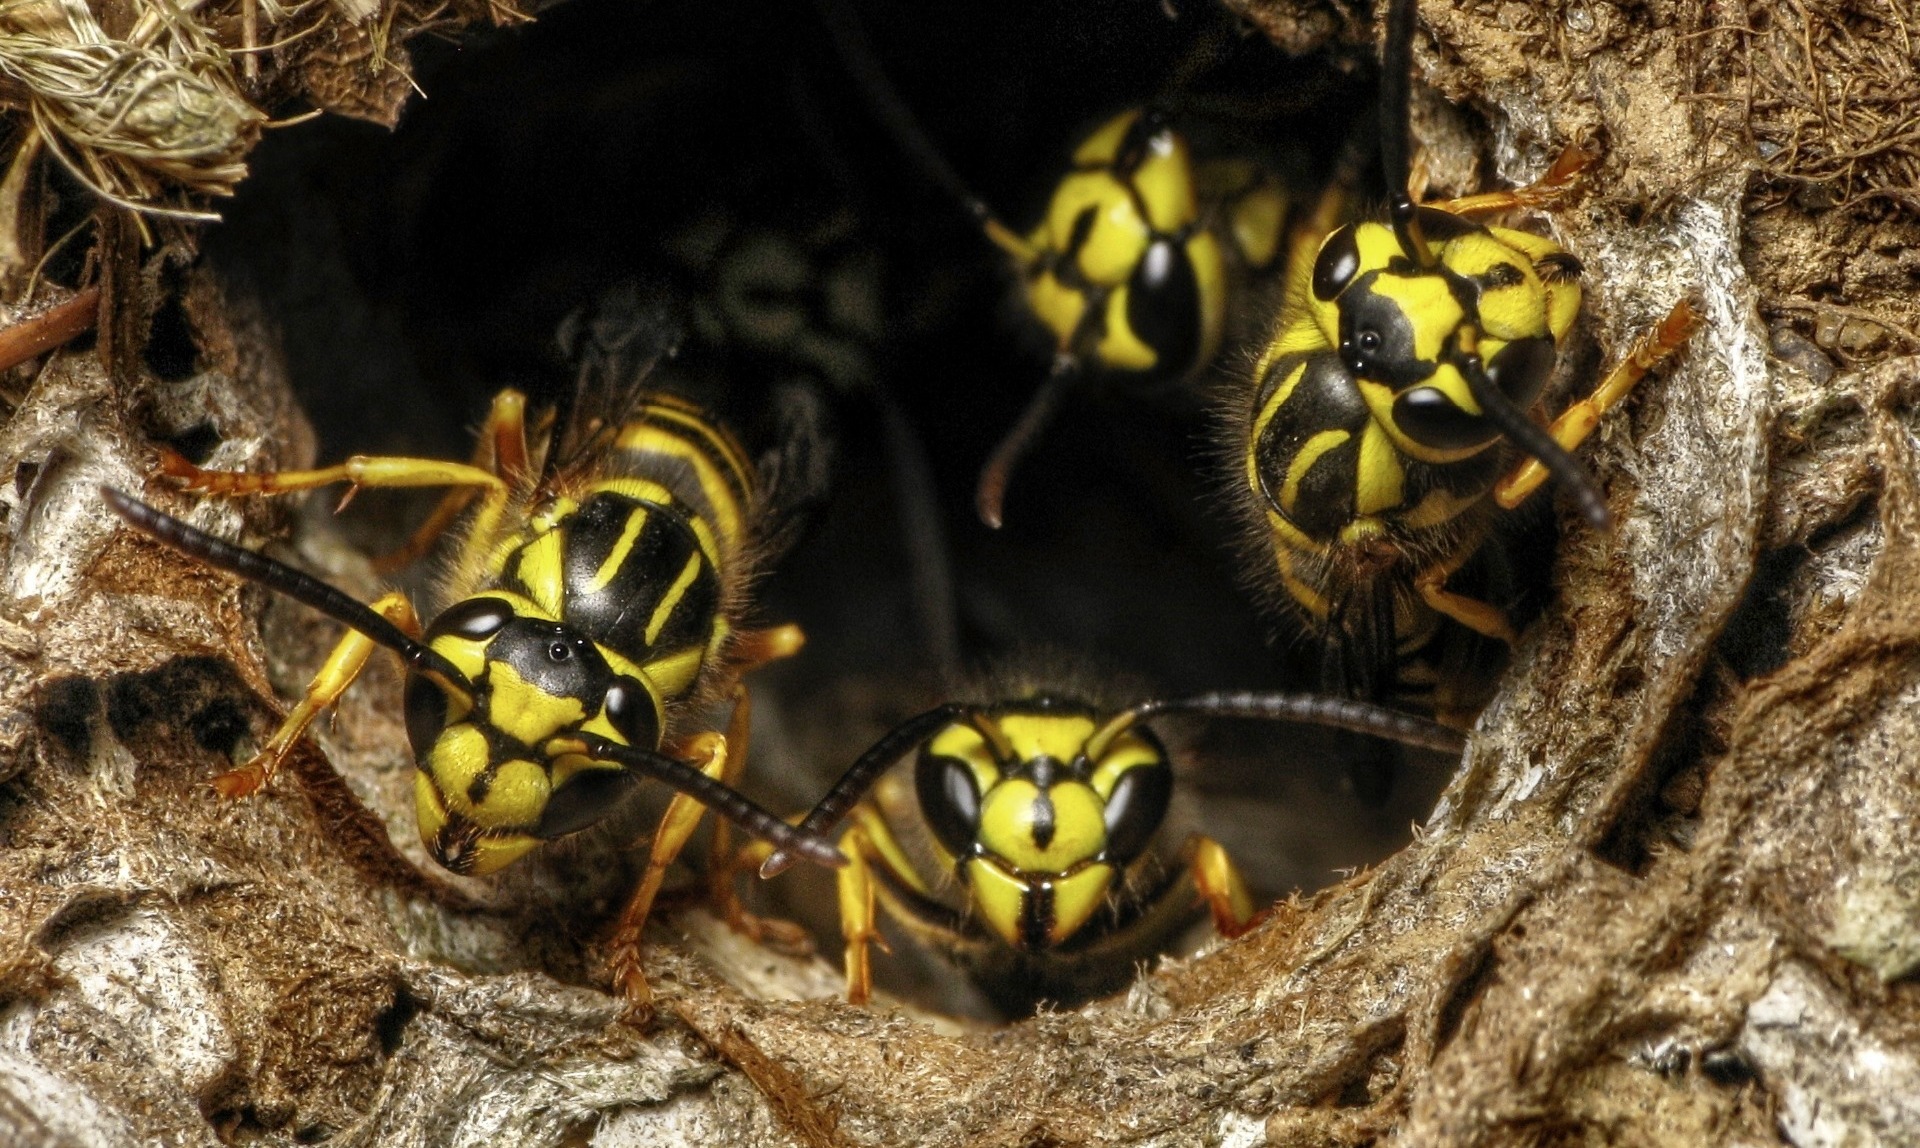 wasps coming out of a hole in the ground